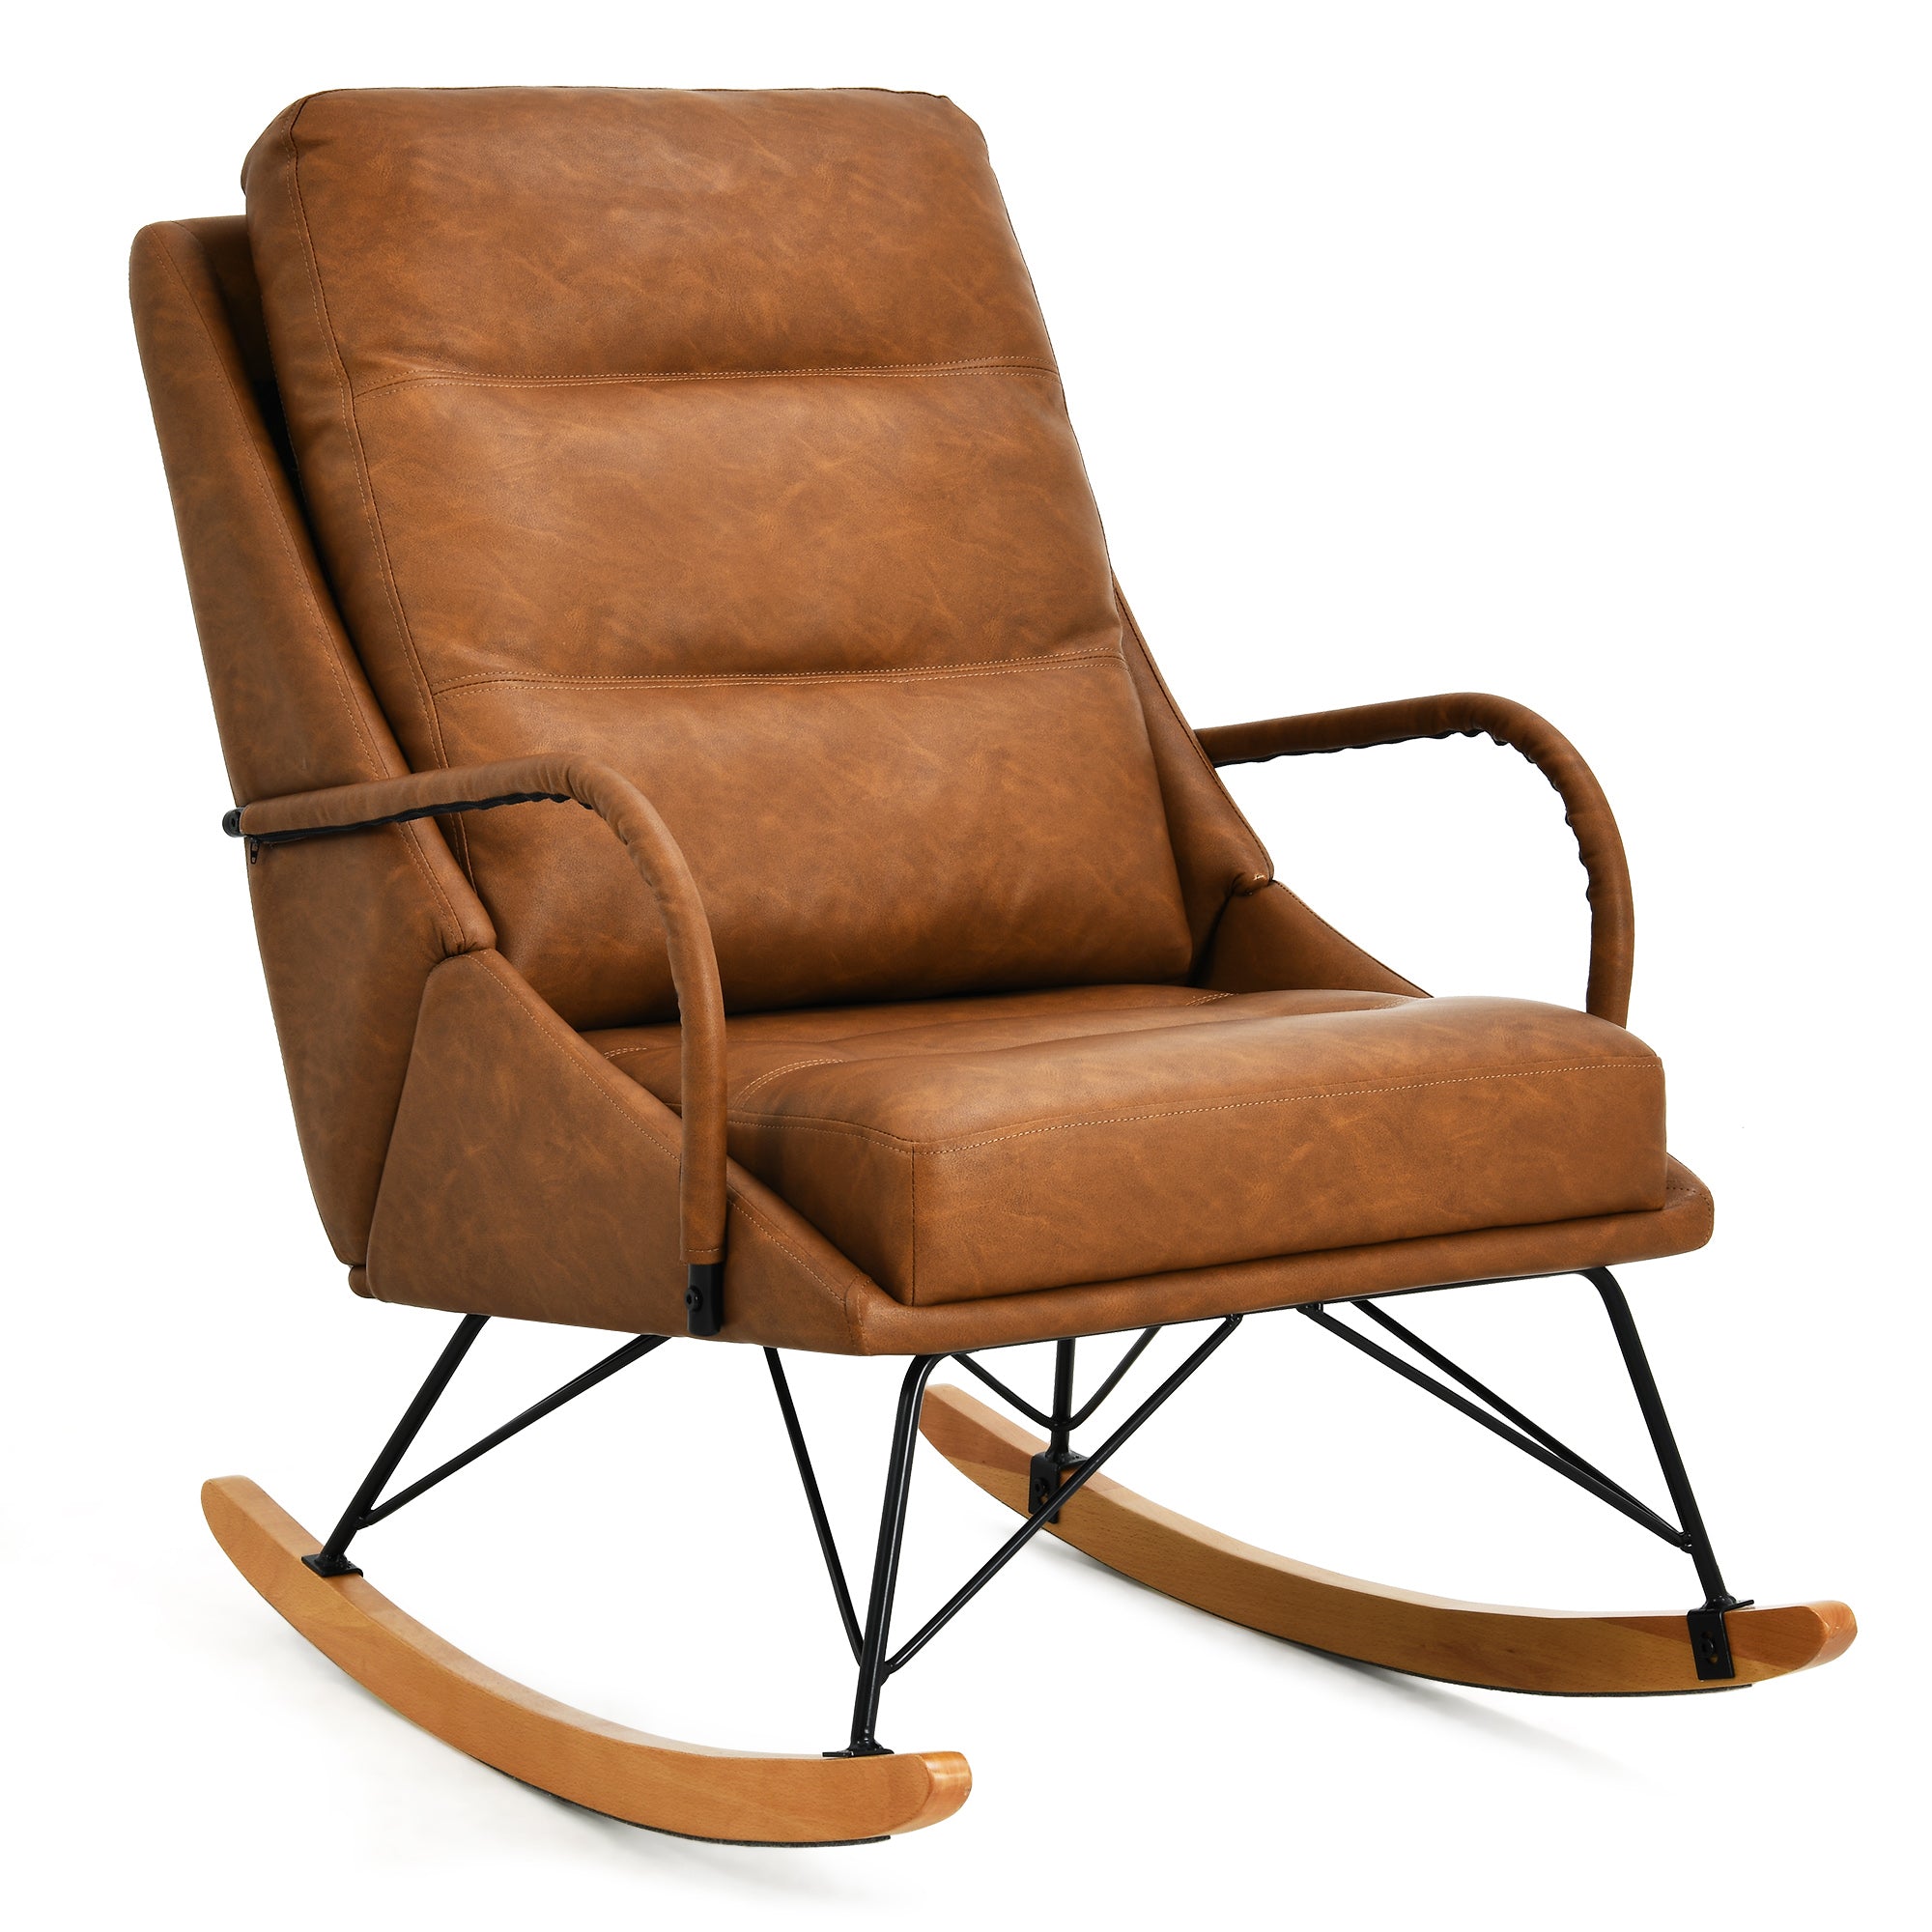 Margaux 24" PU Leather Upholstered High Back Rocking Chair with Wingback Solid Wood Legs, Brown